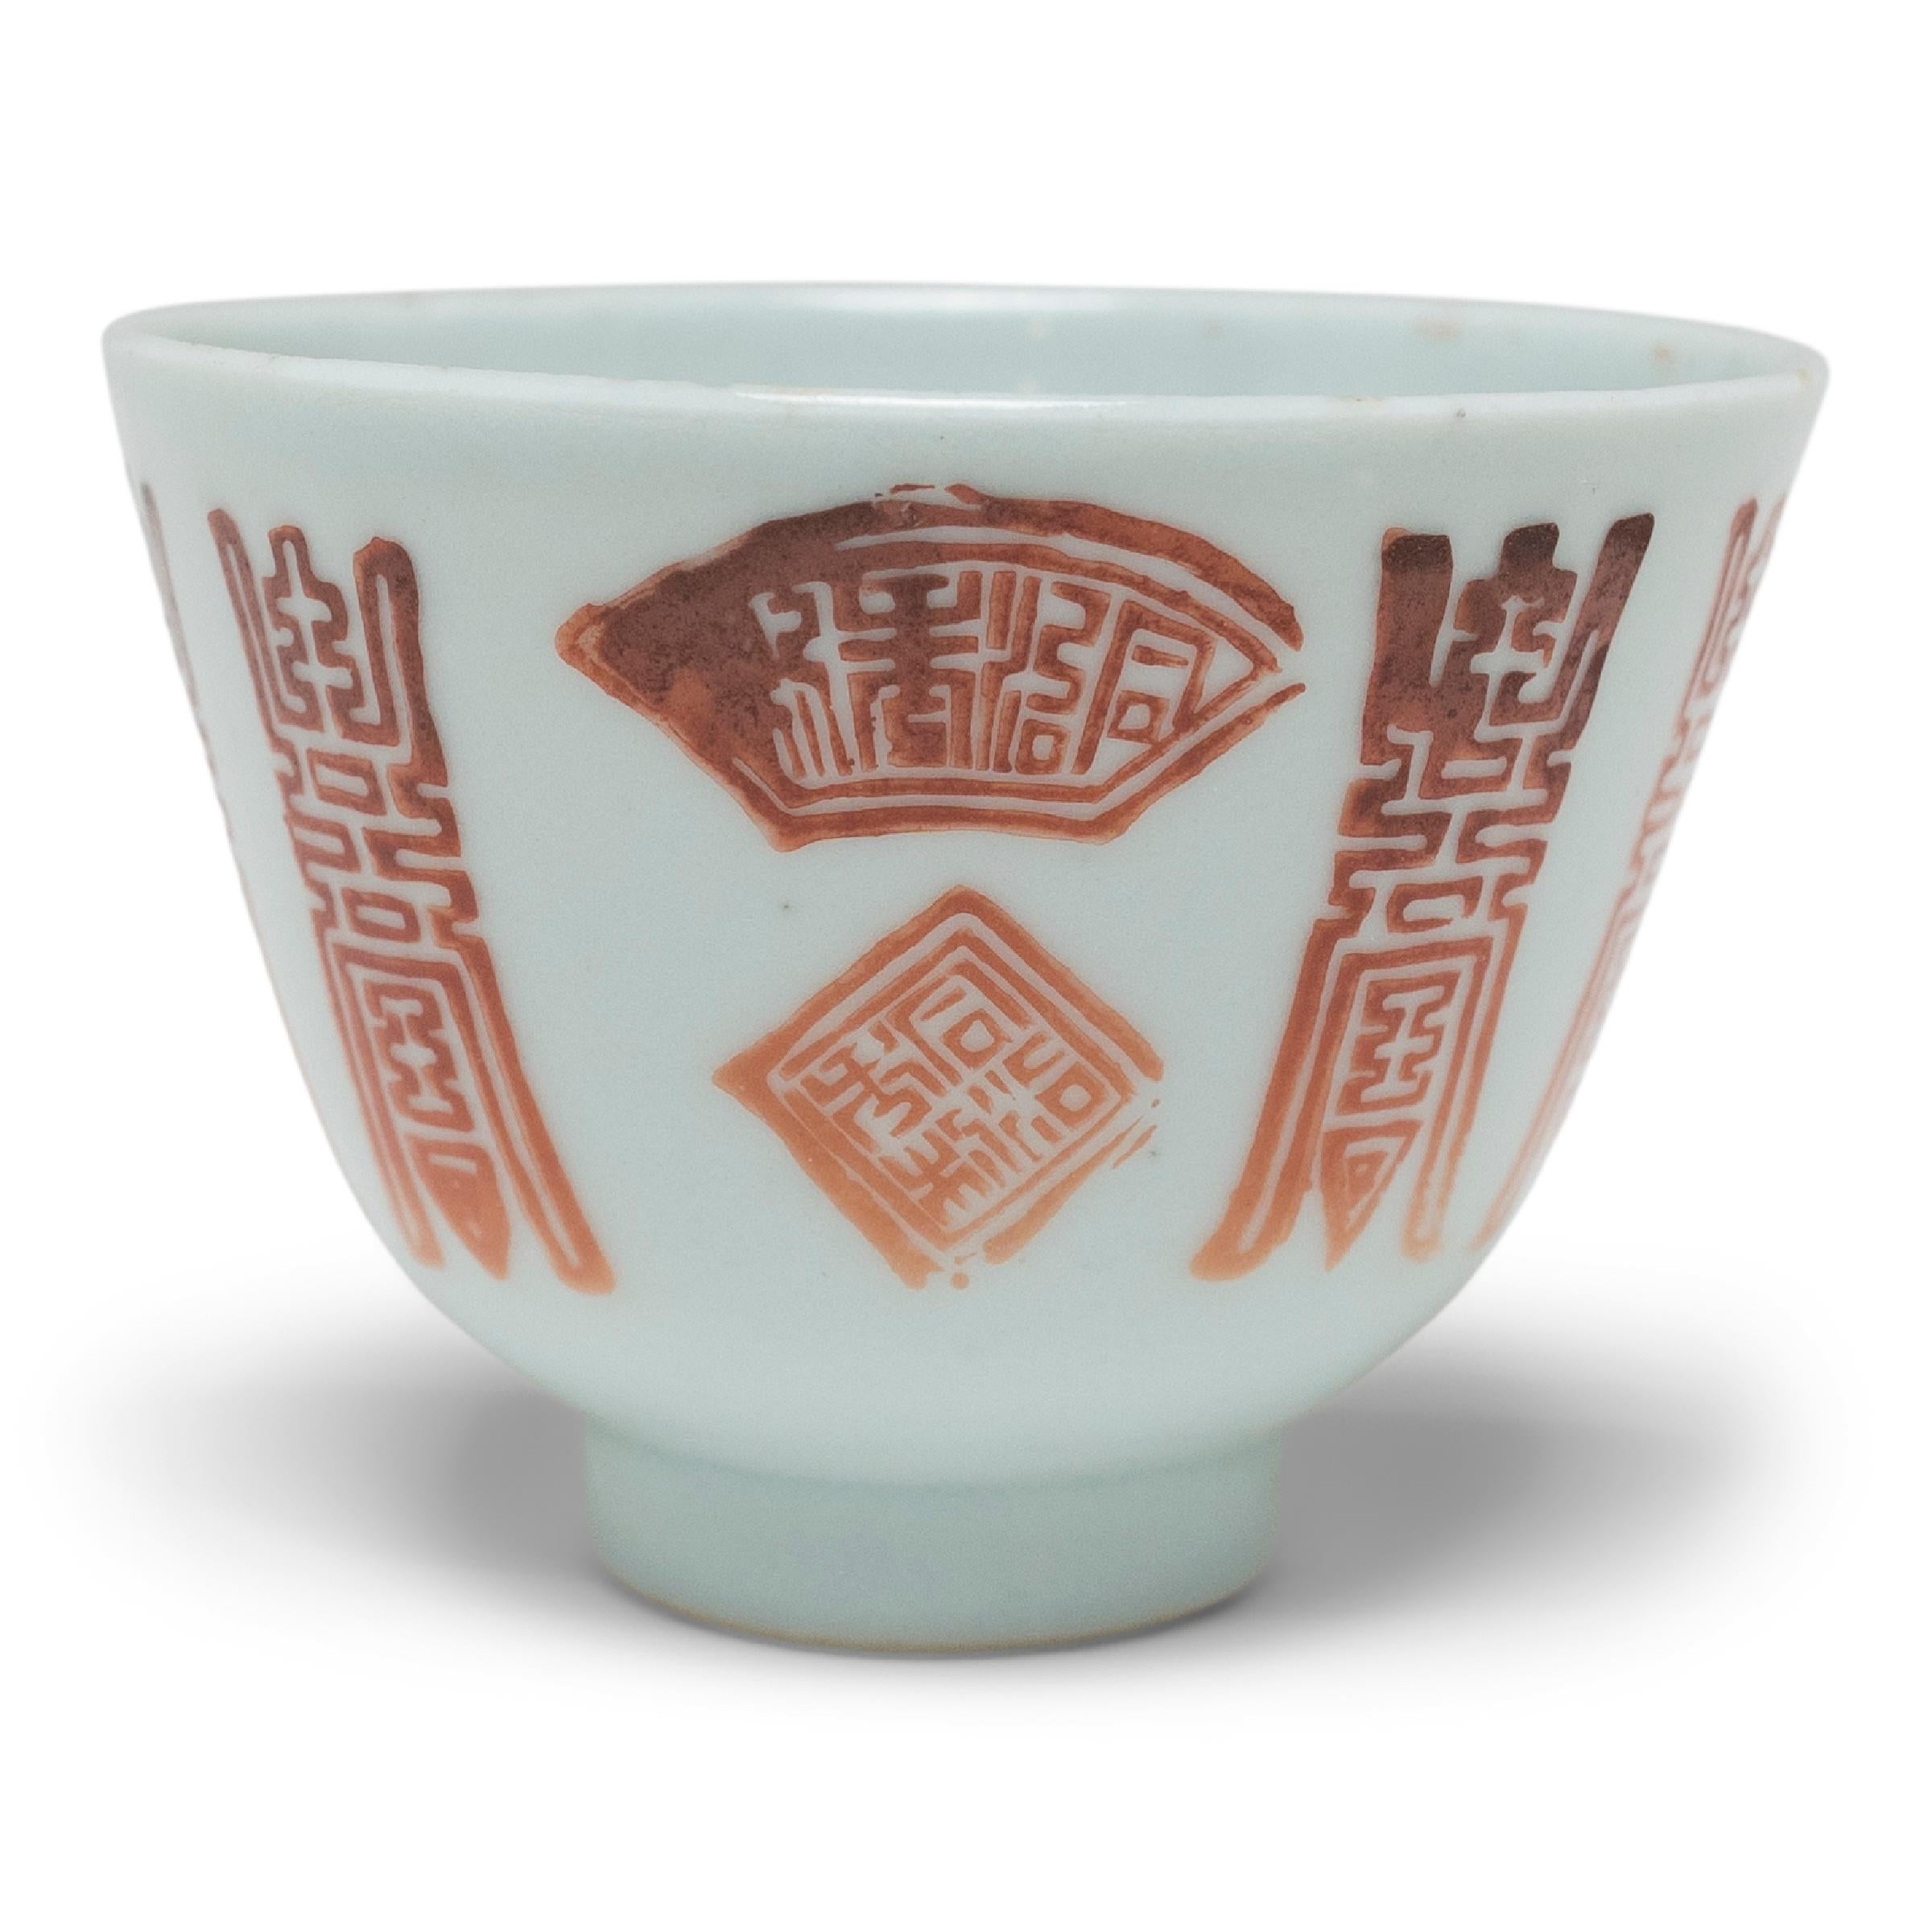 Tea drinking has been an integral part of Chinese culture for centuries, resulting in a wide range of social customs and material traditions both practical and decorative. This fine porcelain tea cup has a simple, tapered form, shaped with a very